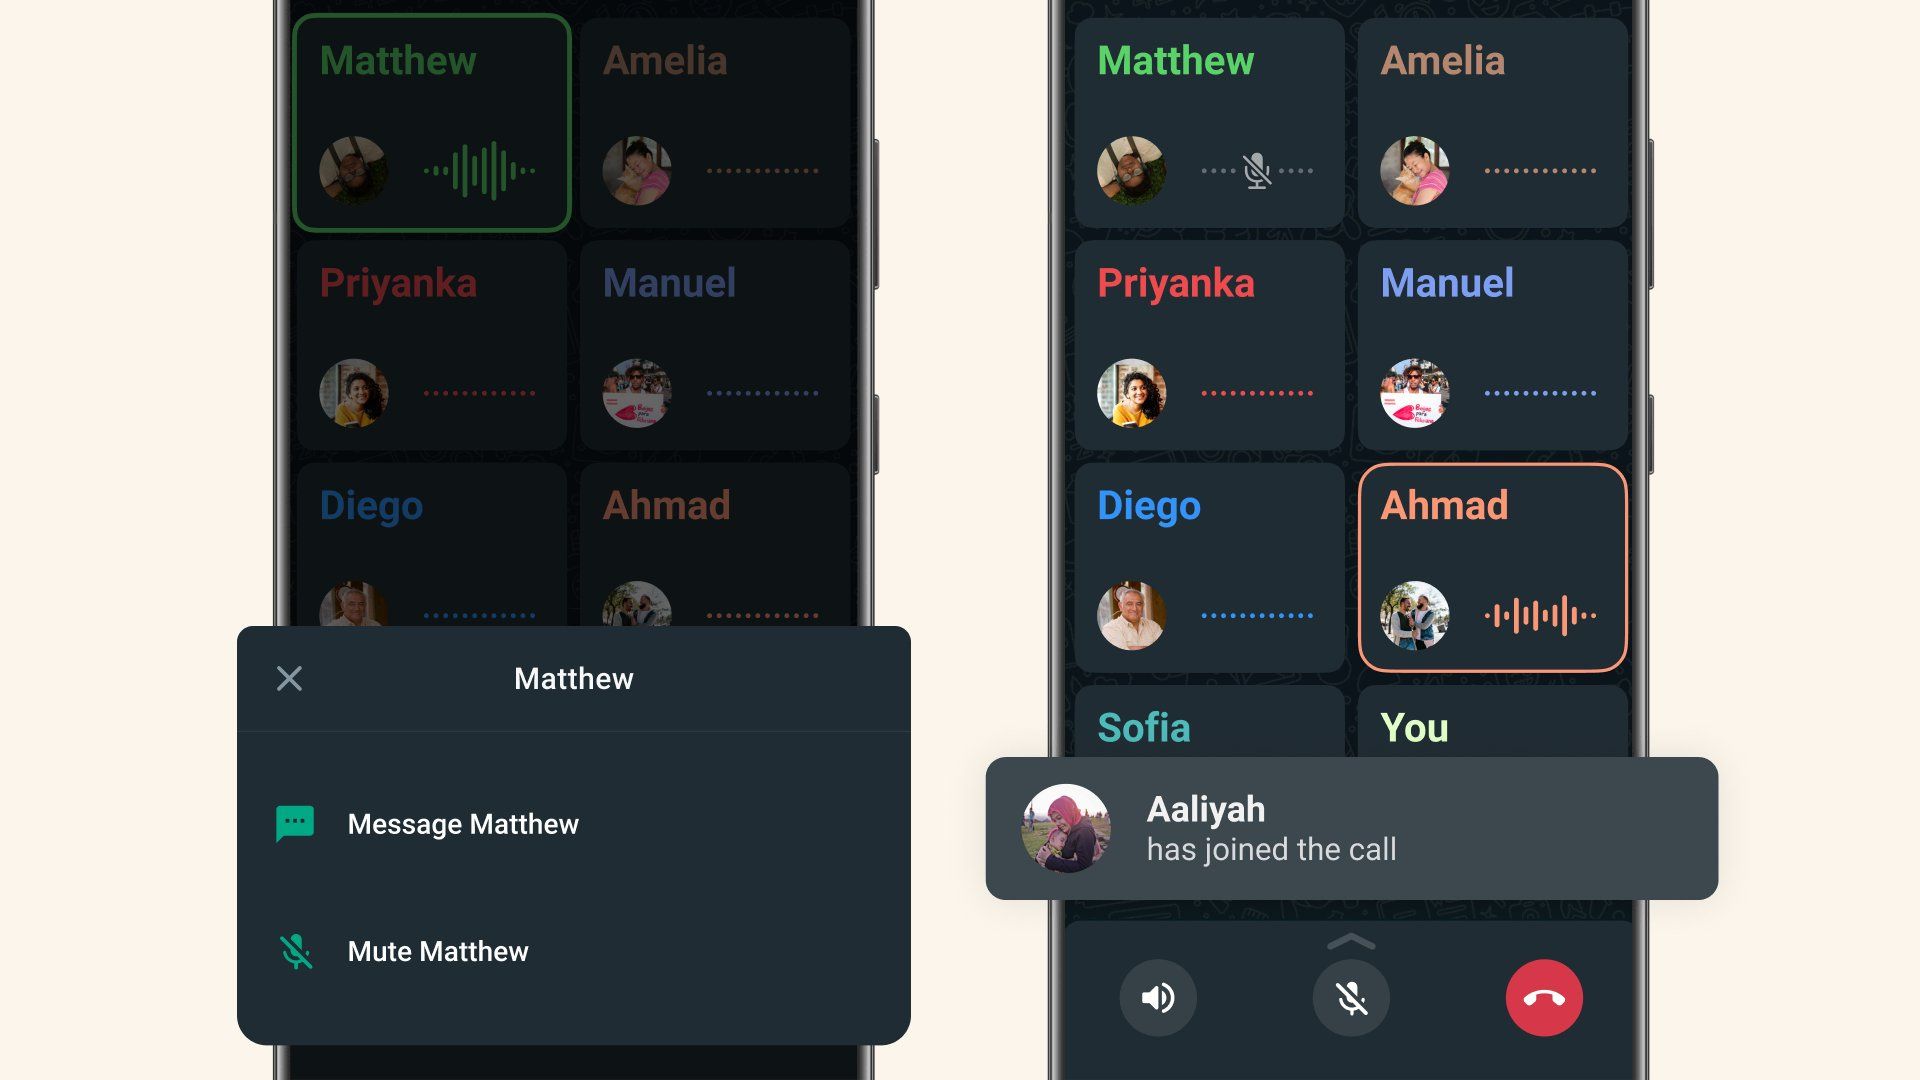 WhatsApp users now have more control over annoying group call members